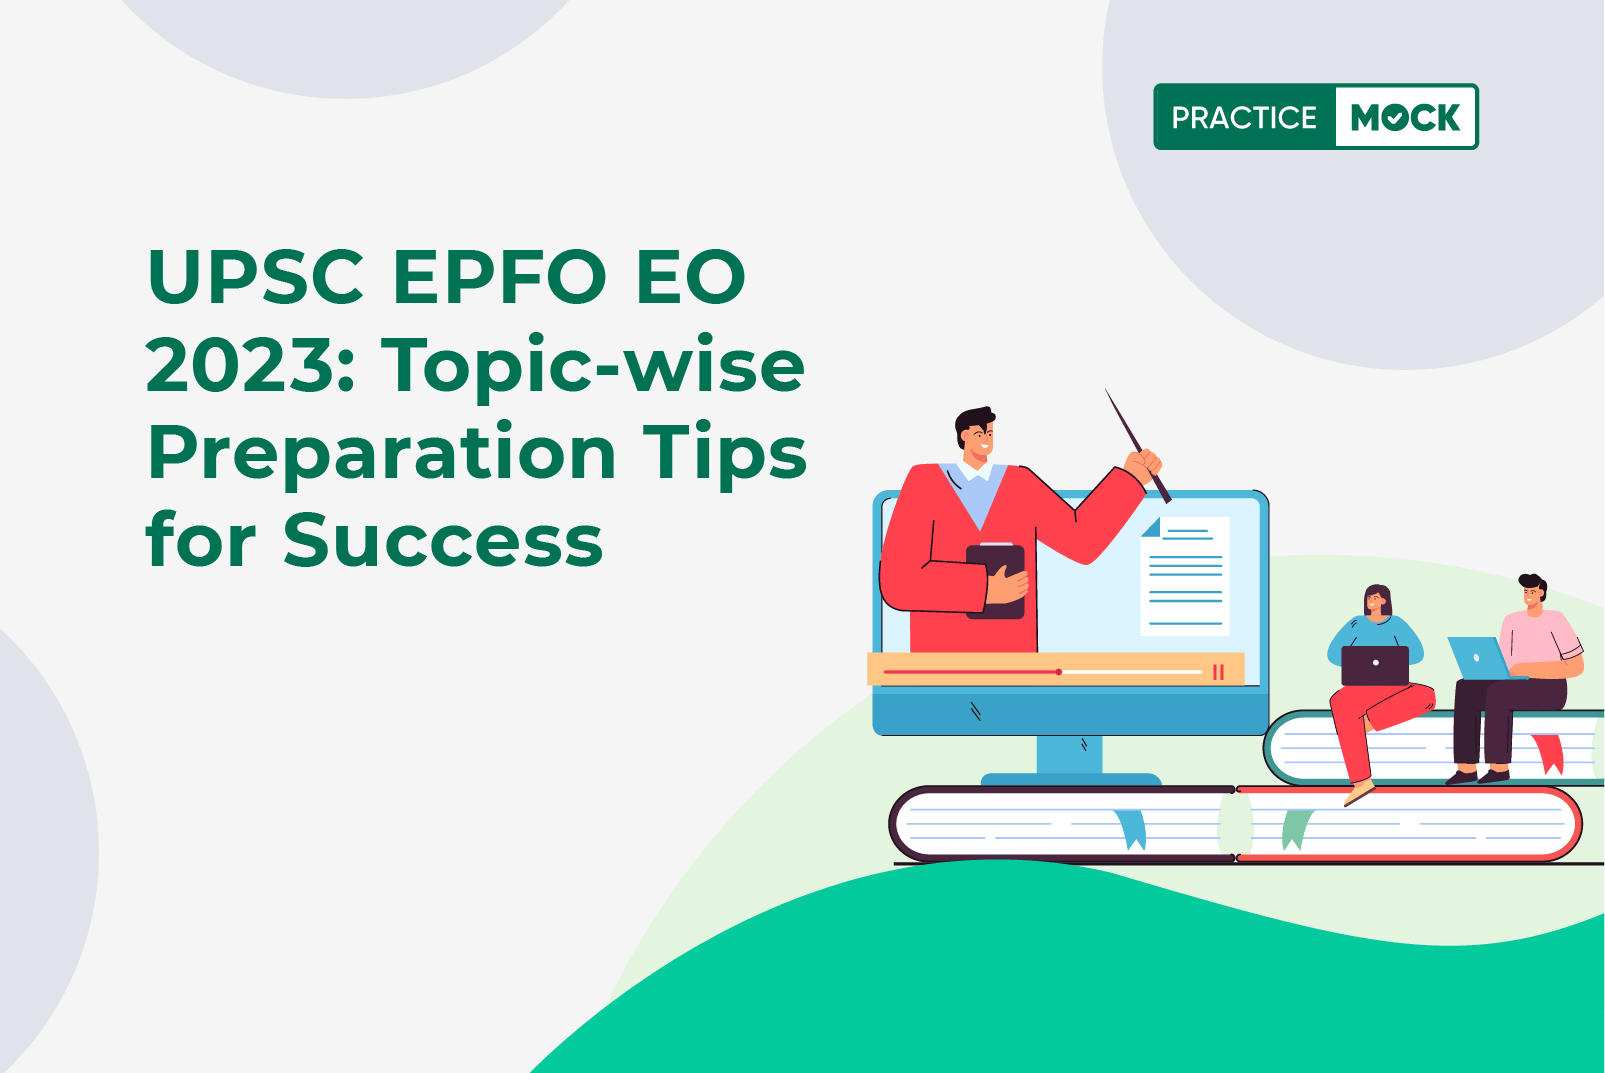 UPSC EPFO EO 2023-Topic-wise Preparation Tips for Success